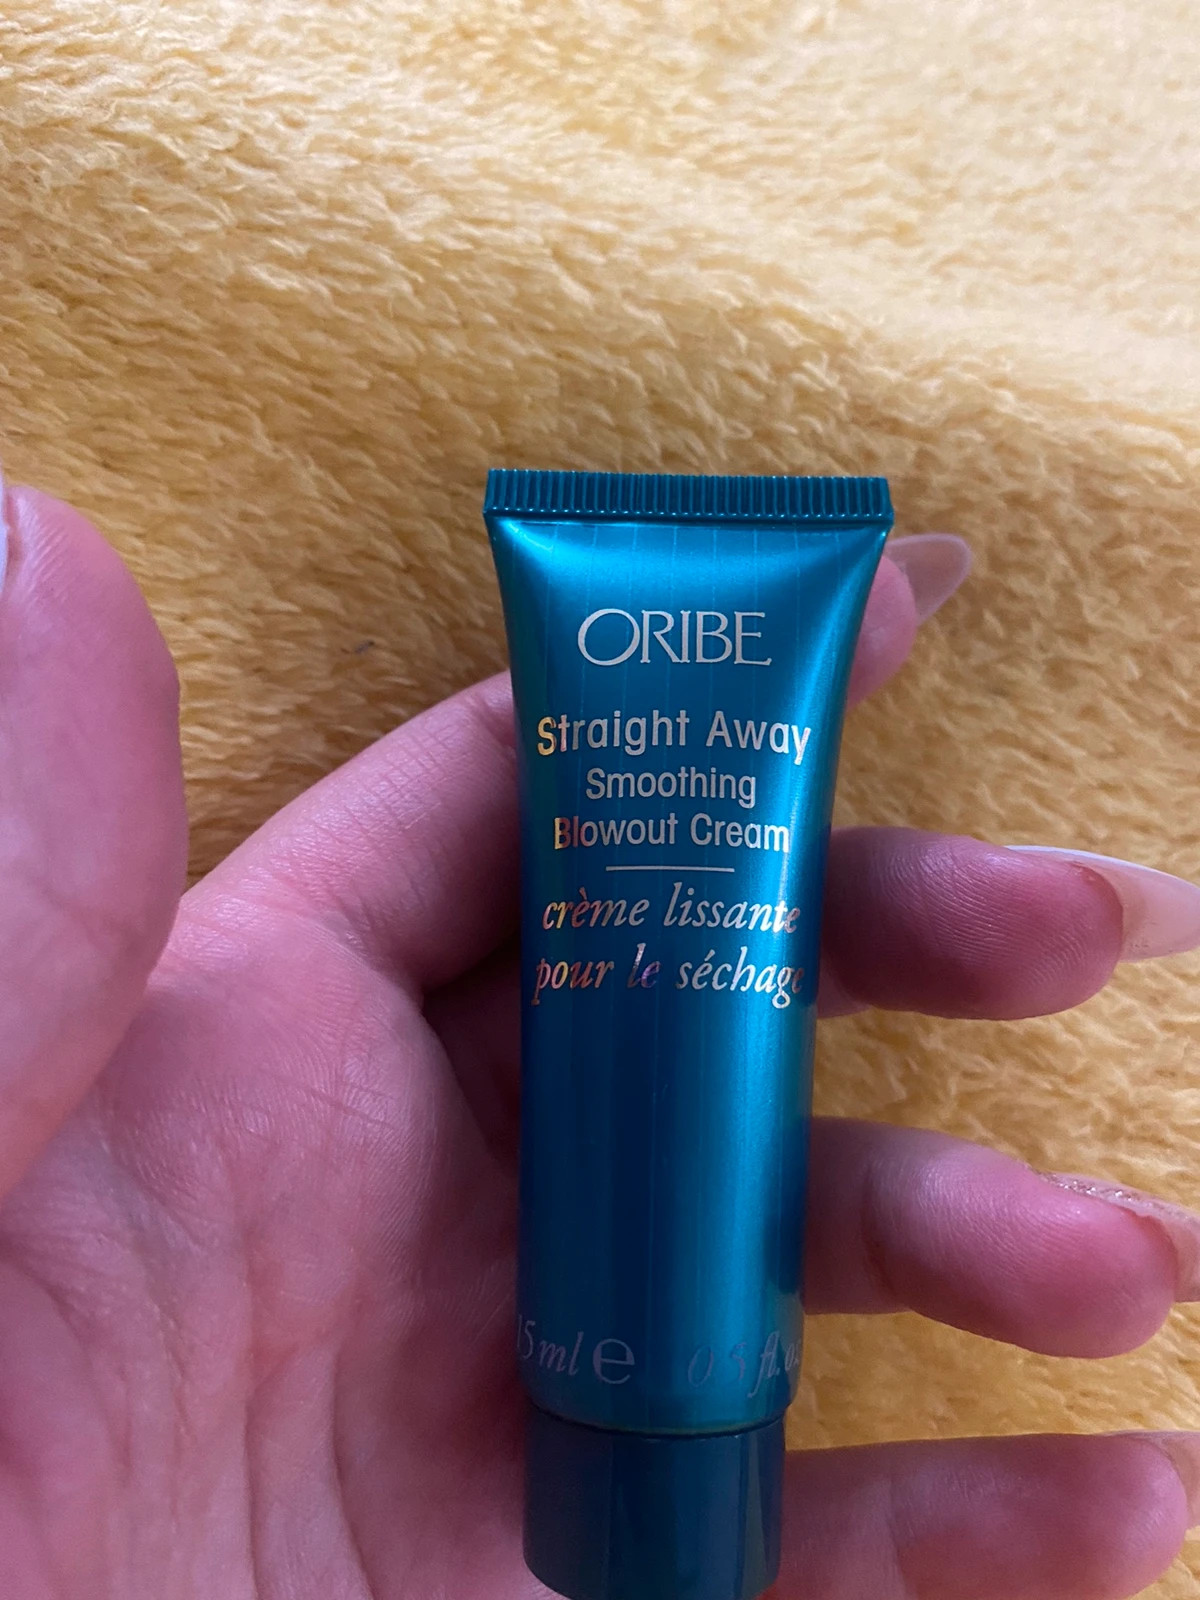 Oribe straight away smoothing blowout cream